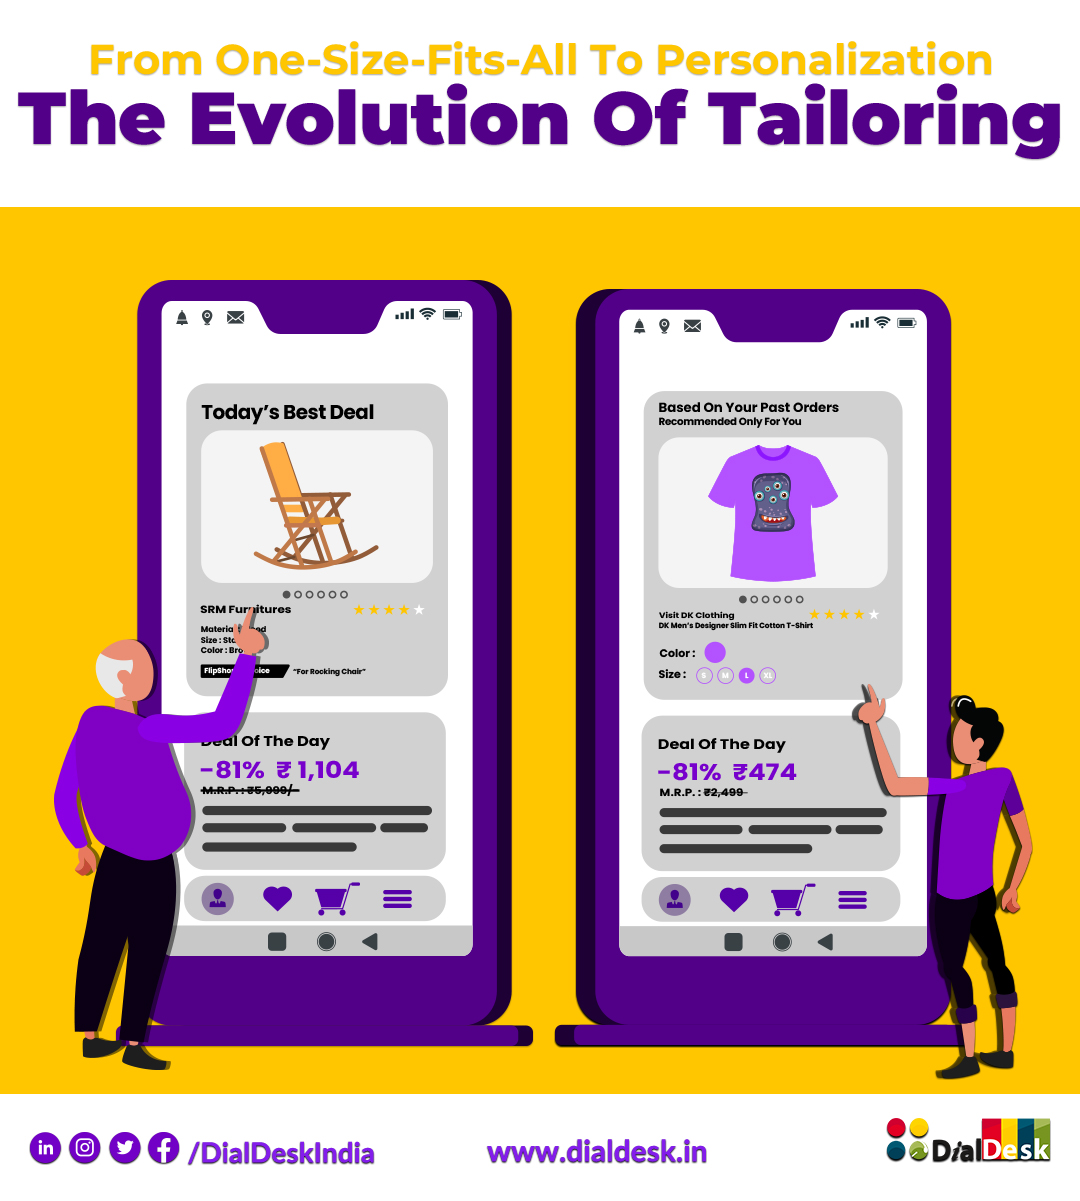 how personalization and tailoring have evolved over time